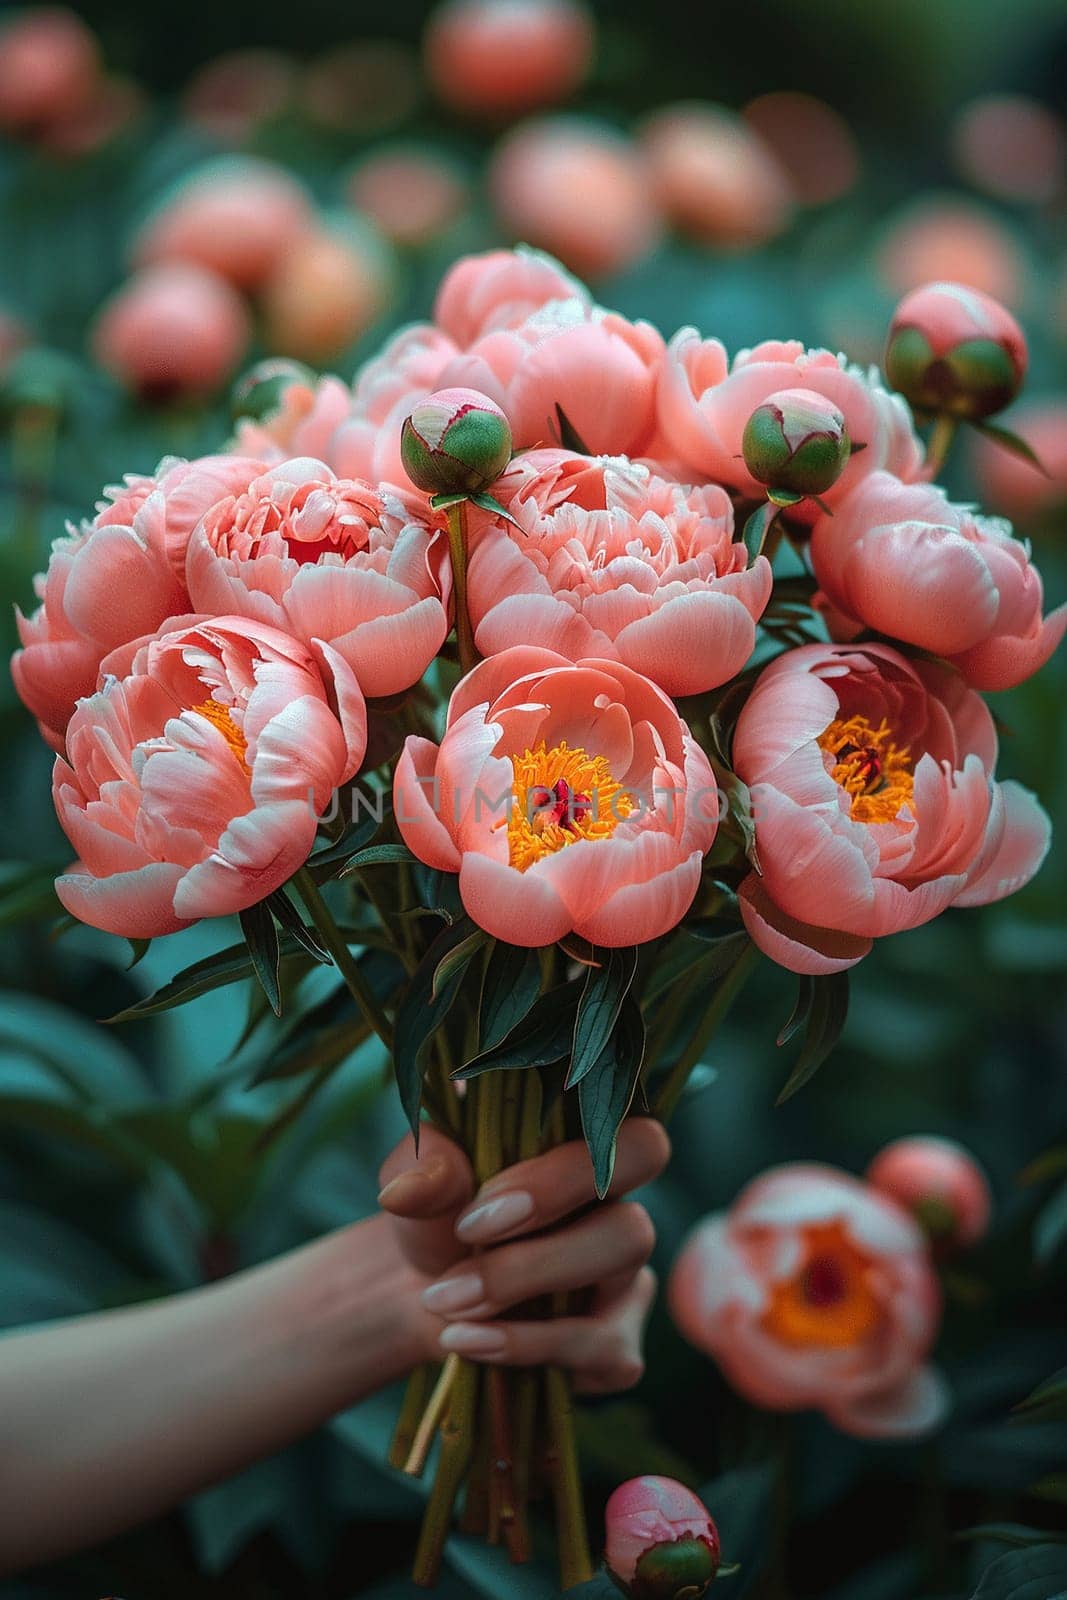 Hand holding a bouquet of fresh peonies, symbolizing natural beauty and inspiration.